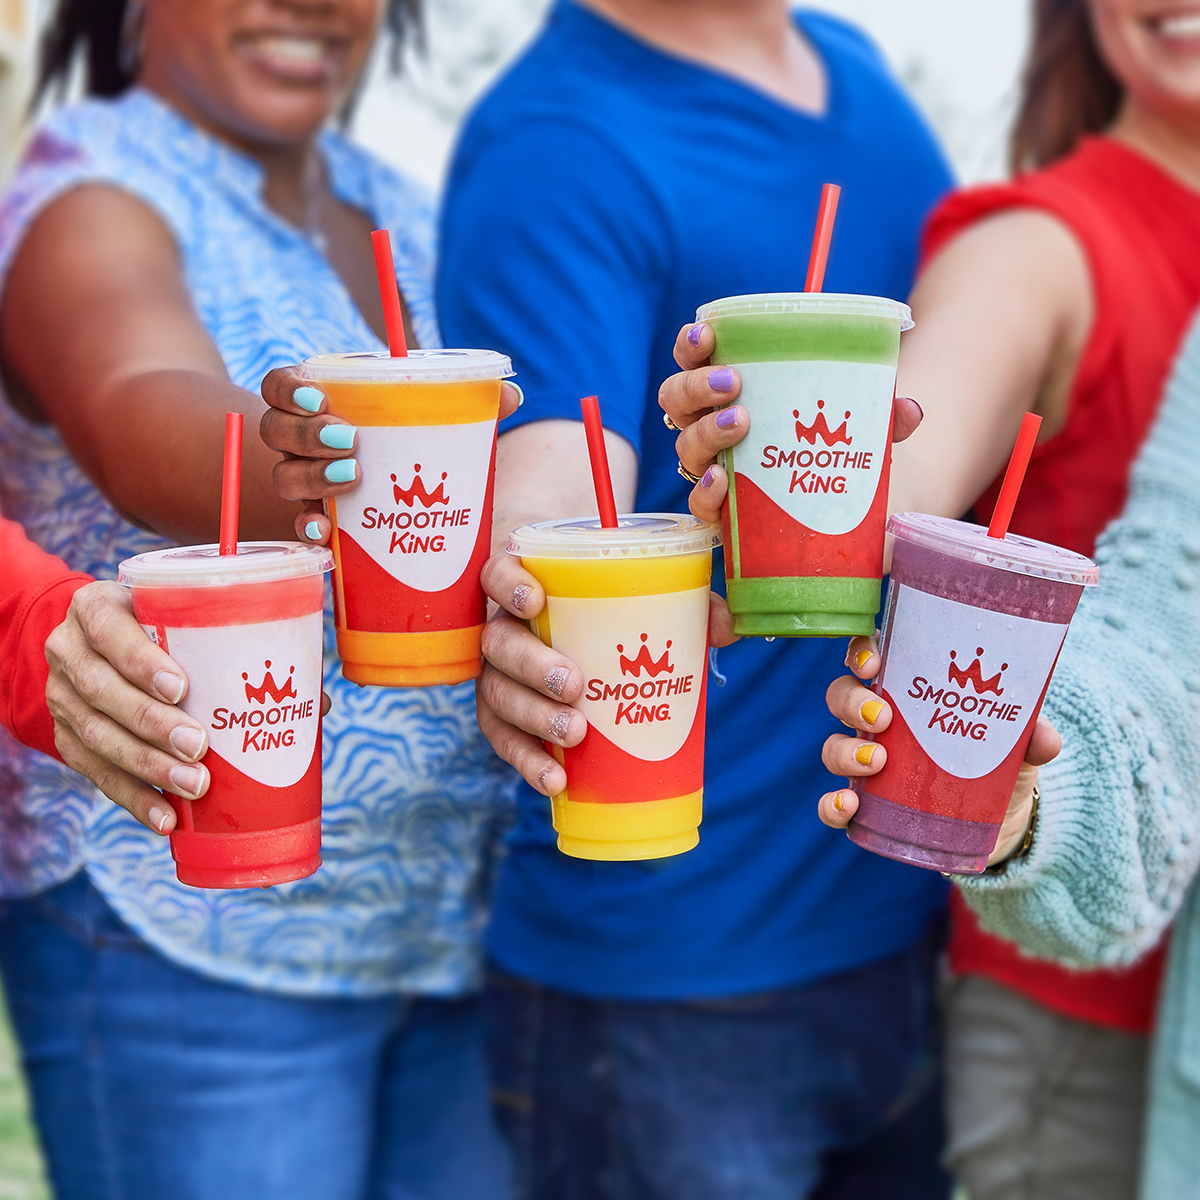 People holding Smoothie King cups